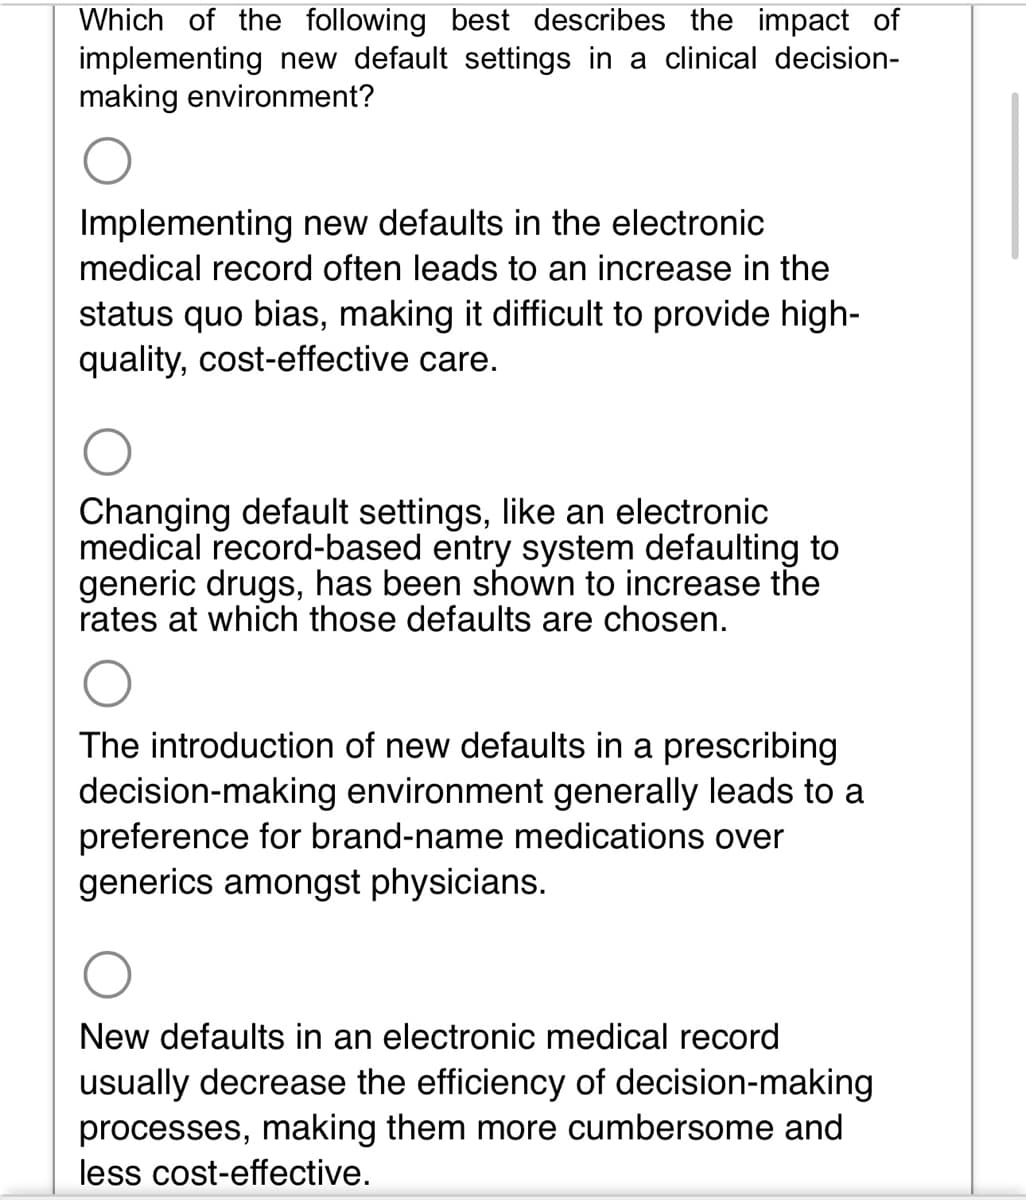 Which of the following best describes the impact of
implementing new default settings in a clinical decision-
making environment?
Implementing new defaults in the electronic
medical record often leads to an increase in the
status quo bias, making it difficult to provide high-
quality, cost-effective care.
Changing default settings, like an electronic
medical record-based entry system defaulting to
generic drugs, has been shown to increase the
rates at which those defaults are chosen.
The introduction of new defaults in a prescribing
decision-making environment generally leads to a
preference for brand-name medications over
generics amongst physicians.
New defaults in an electronic medical record
usually decrease the efficiency of decision-making
processes, making them more cumbersome and
less cost-effective.